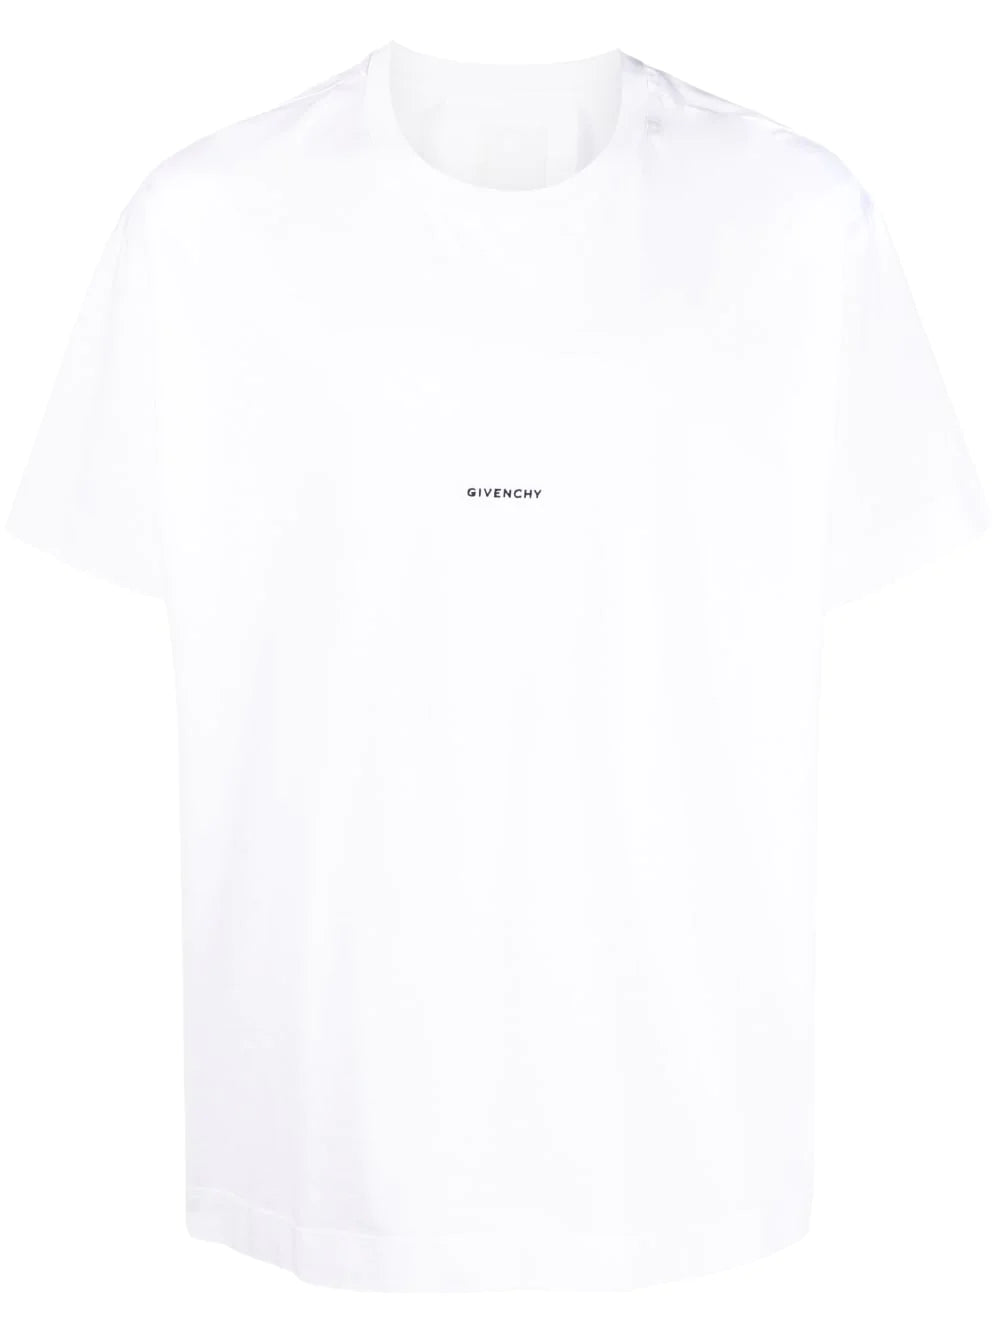 GIVENCHY T-shirt in cotone bianco